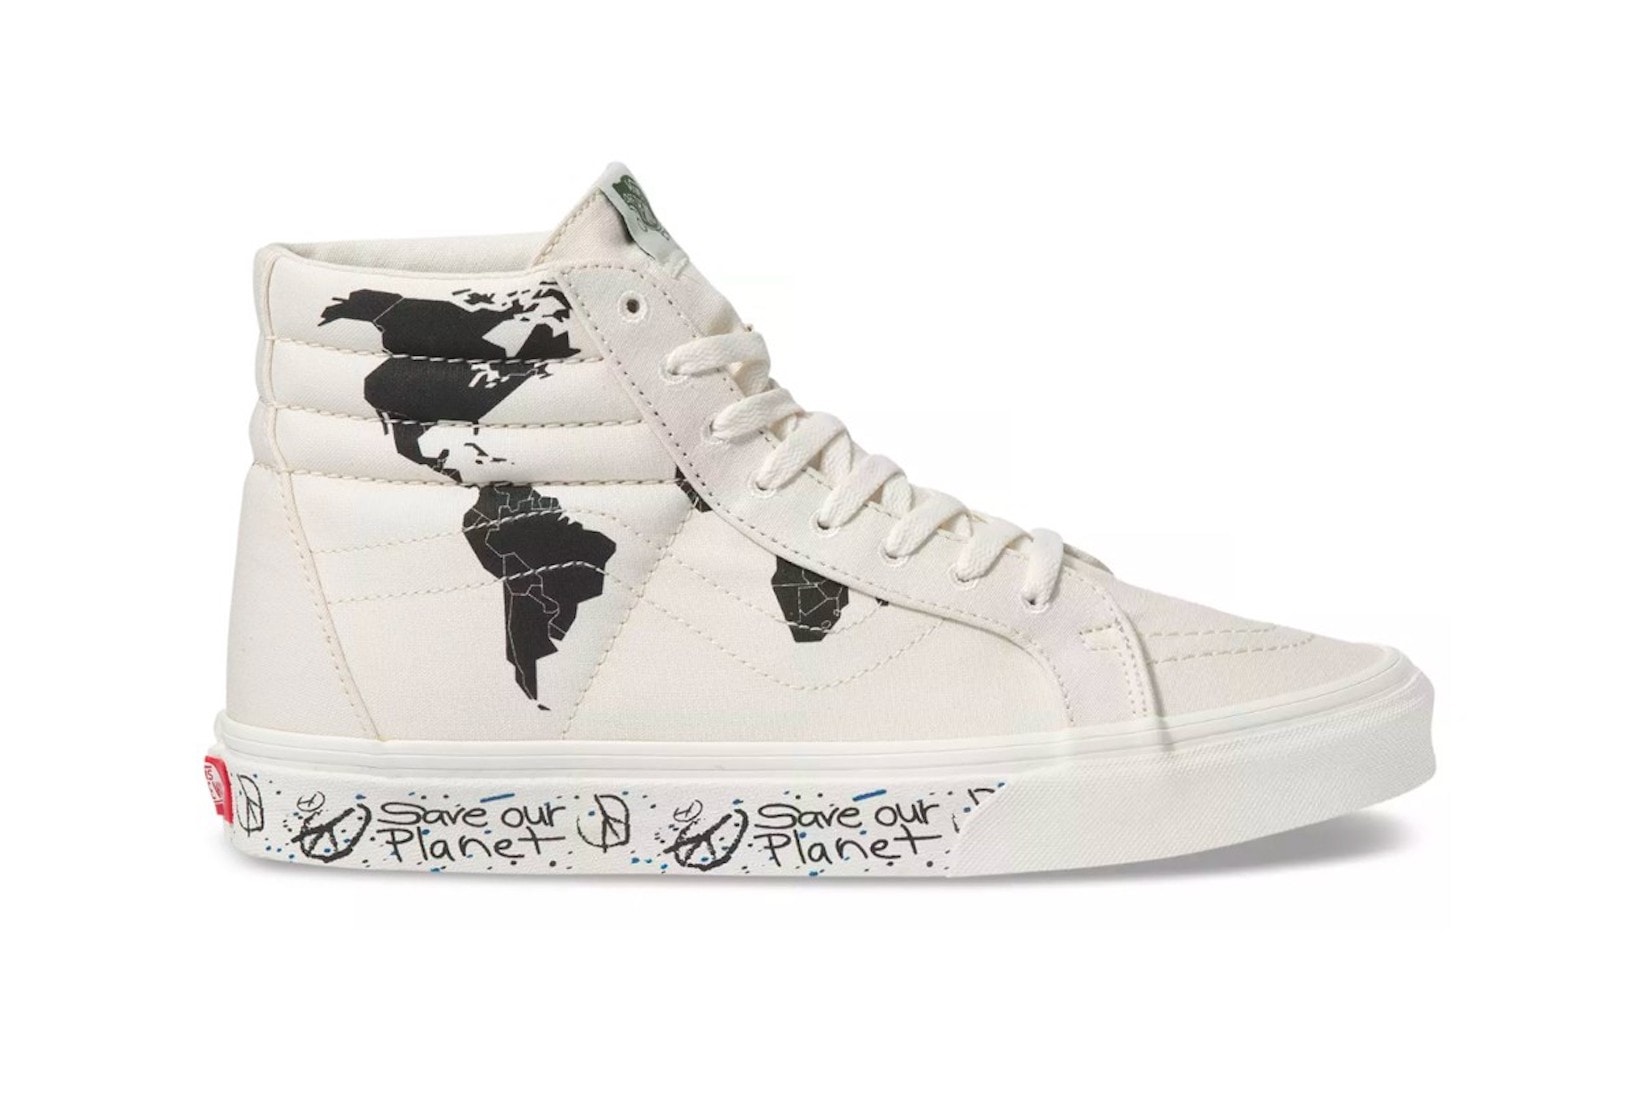 vans save our planet collection sk8 hi reissue sneakers sustainability shoes footwear white black